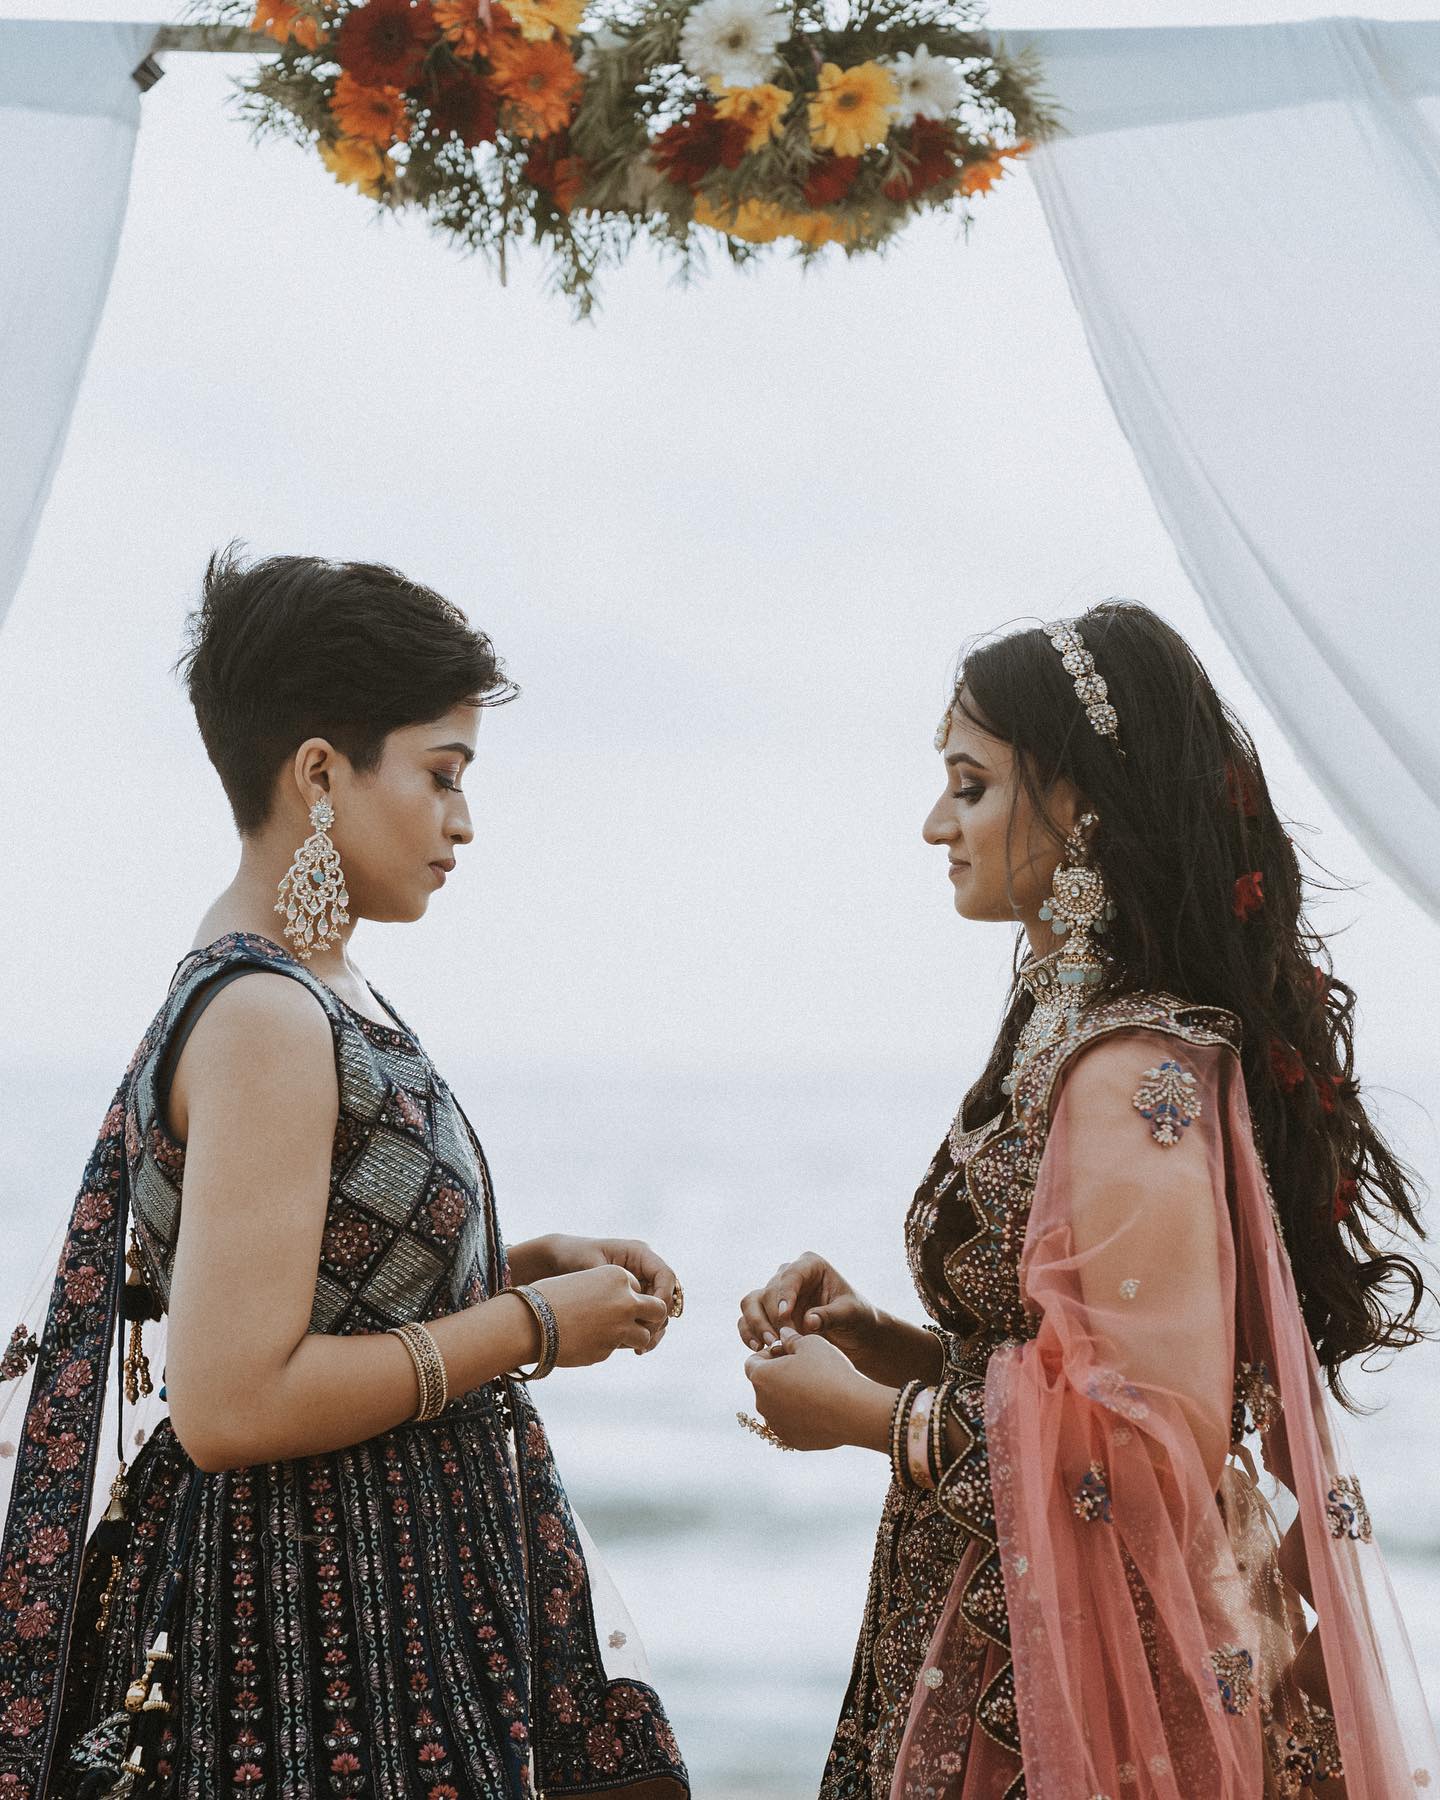 Kerala-Based Lesbian Couple’s Wedding Pictures Go Viral!